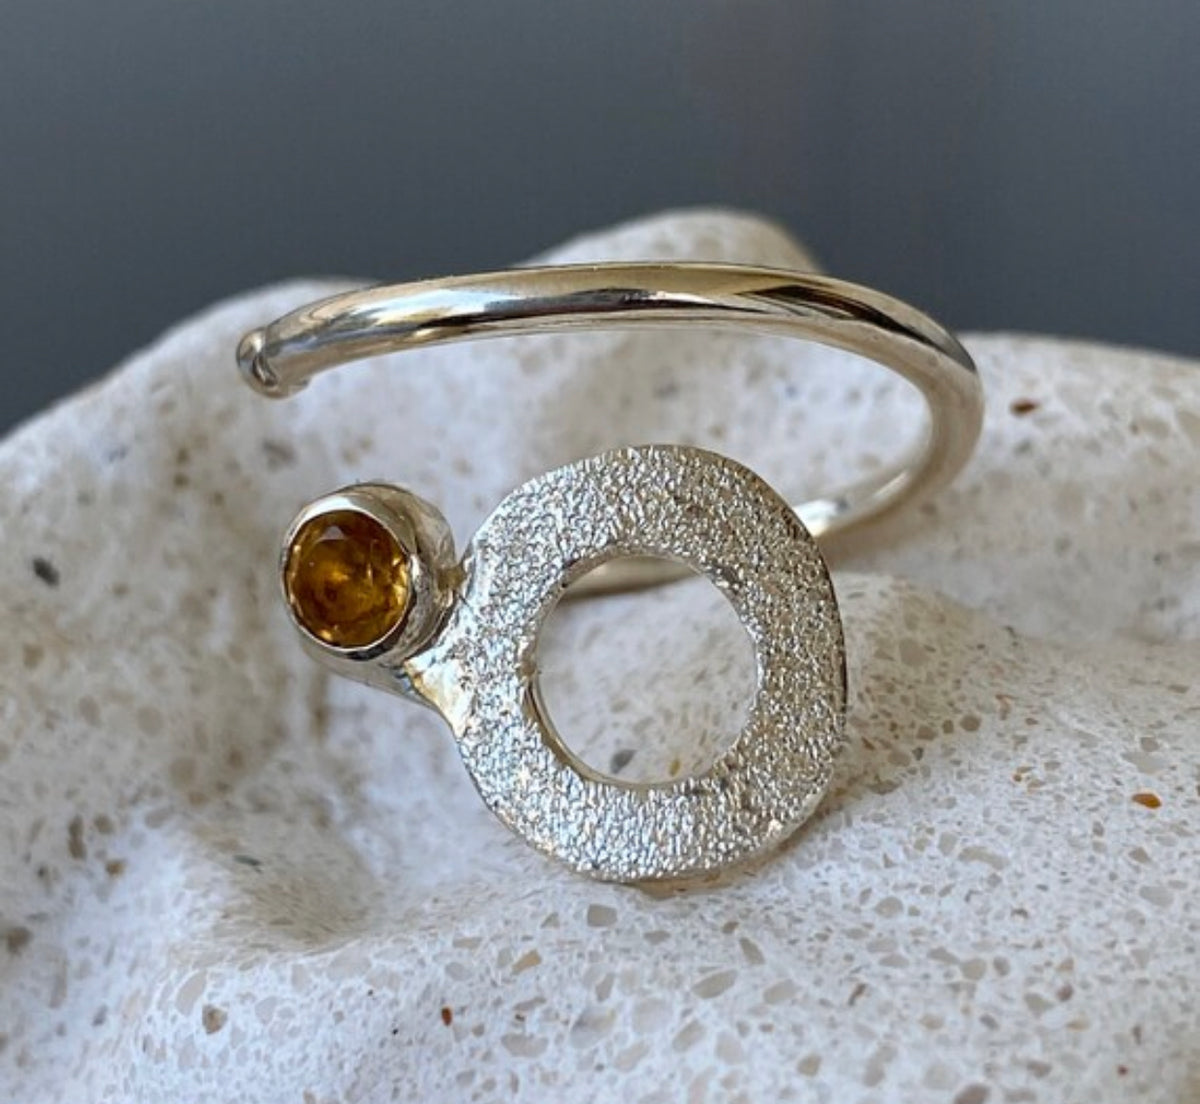 circle ring silver handmade open ring with a citrine gemstone